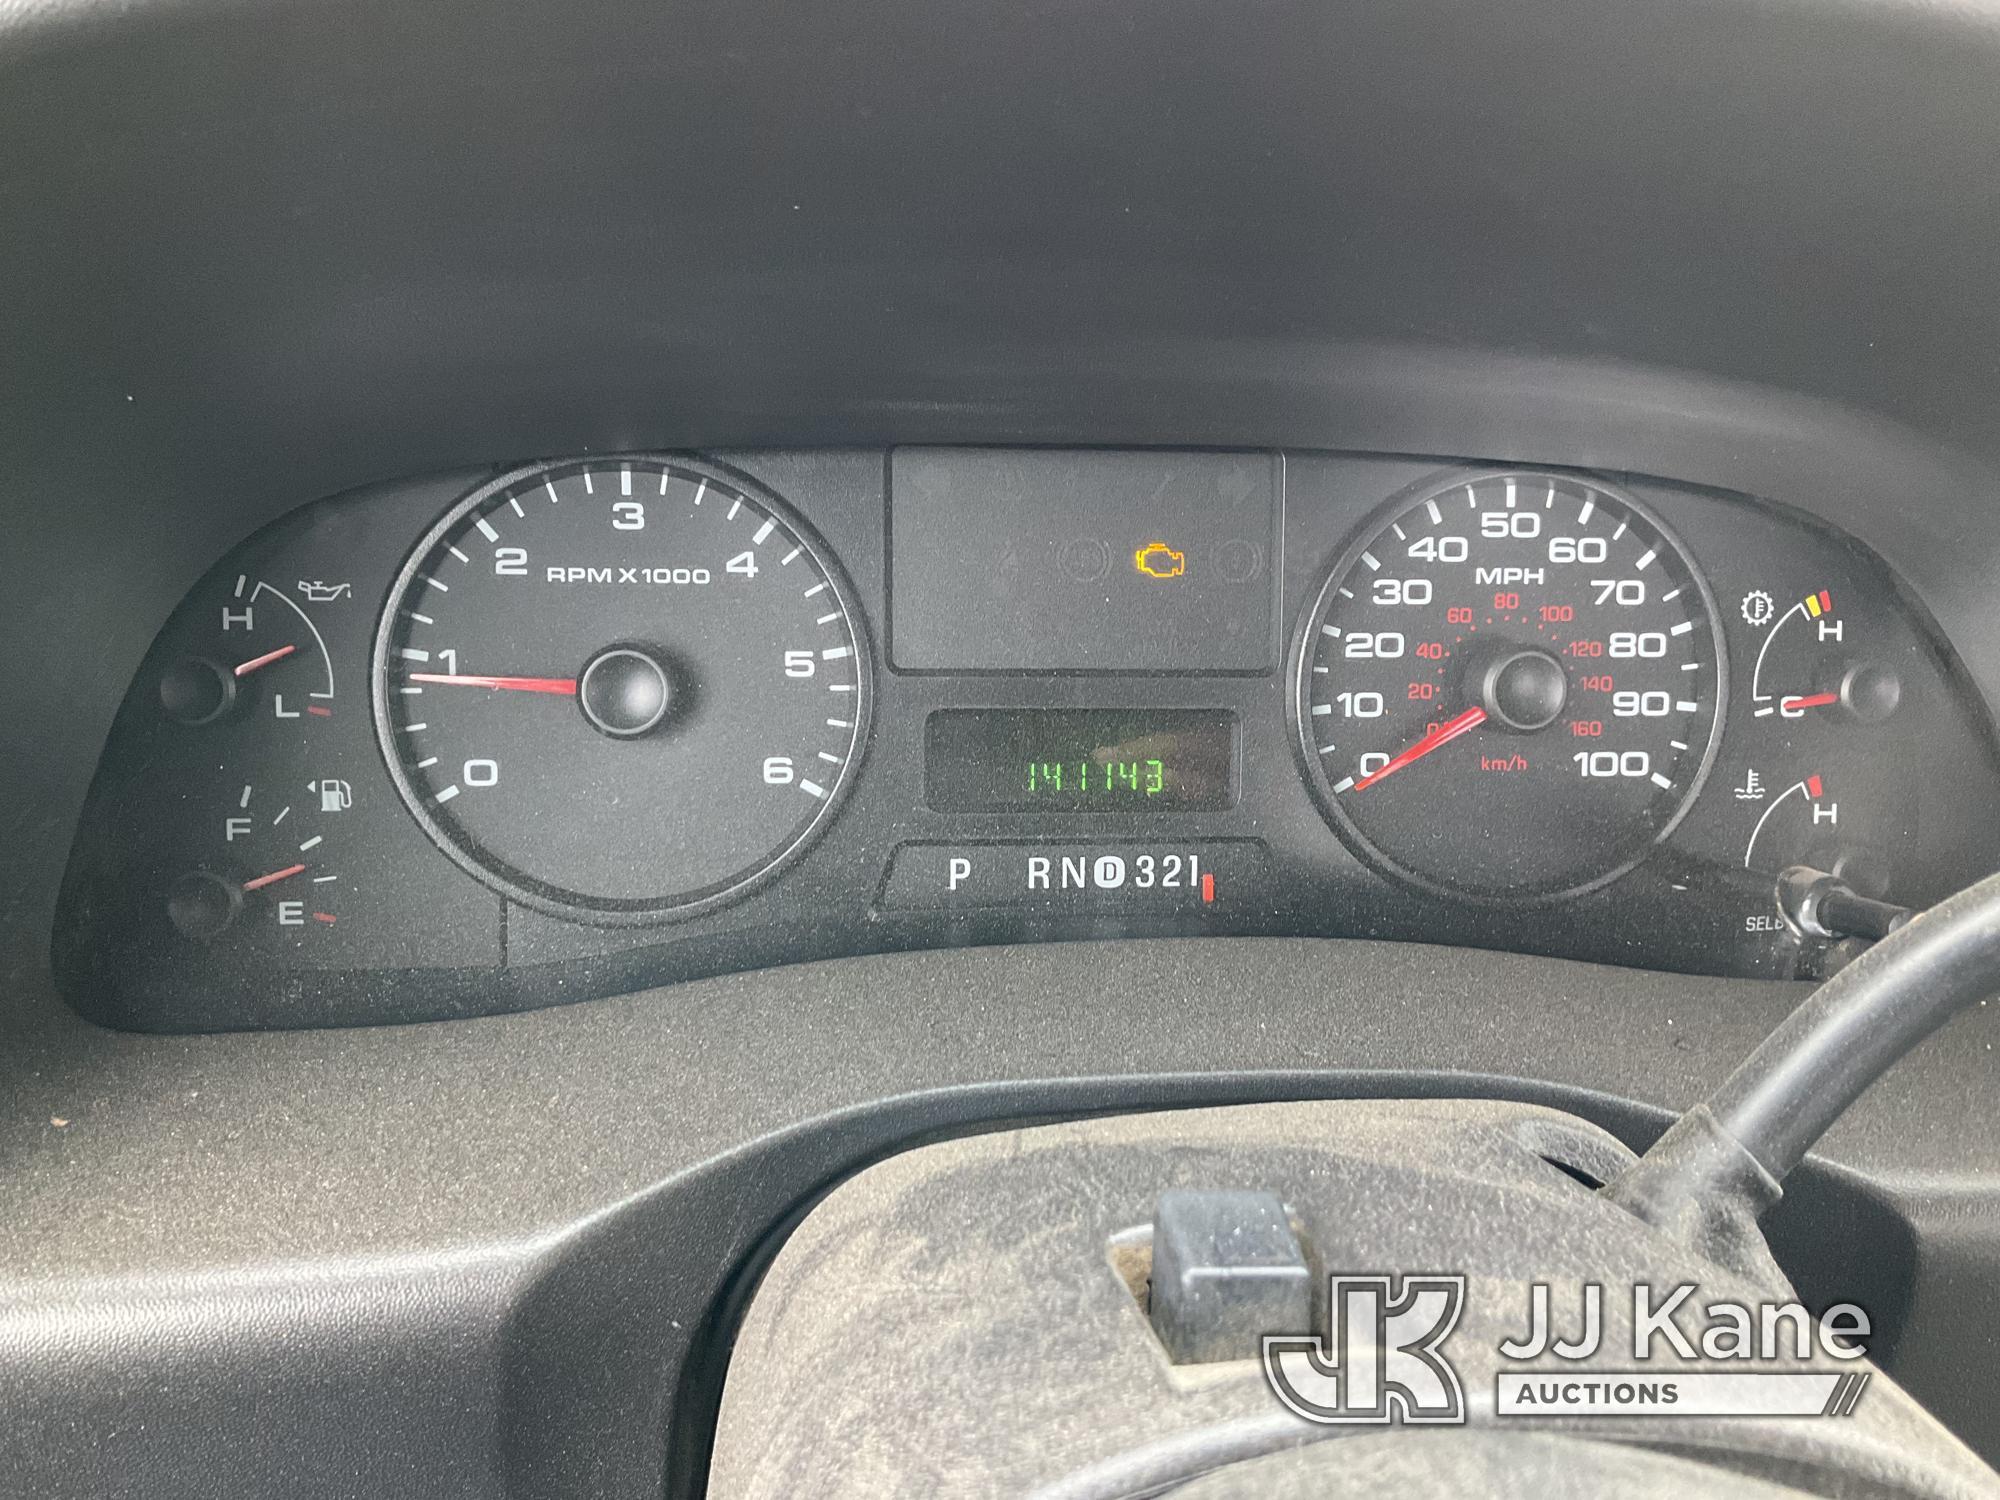 (Jurupa Valley, CA) 2007 Ford F250 Extended-Cab Pickup Truck Runs Does Not Move, Has Check Engine Li